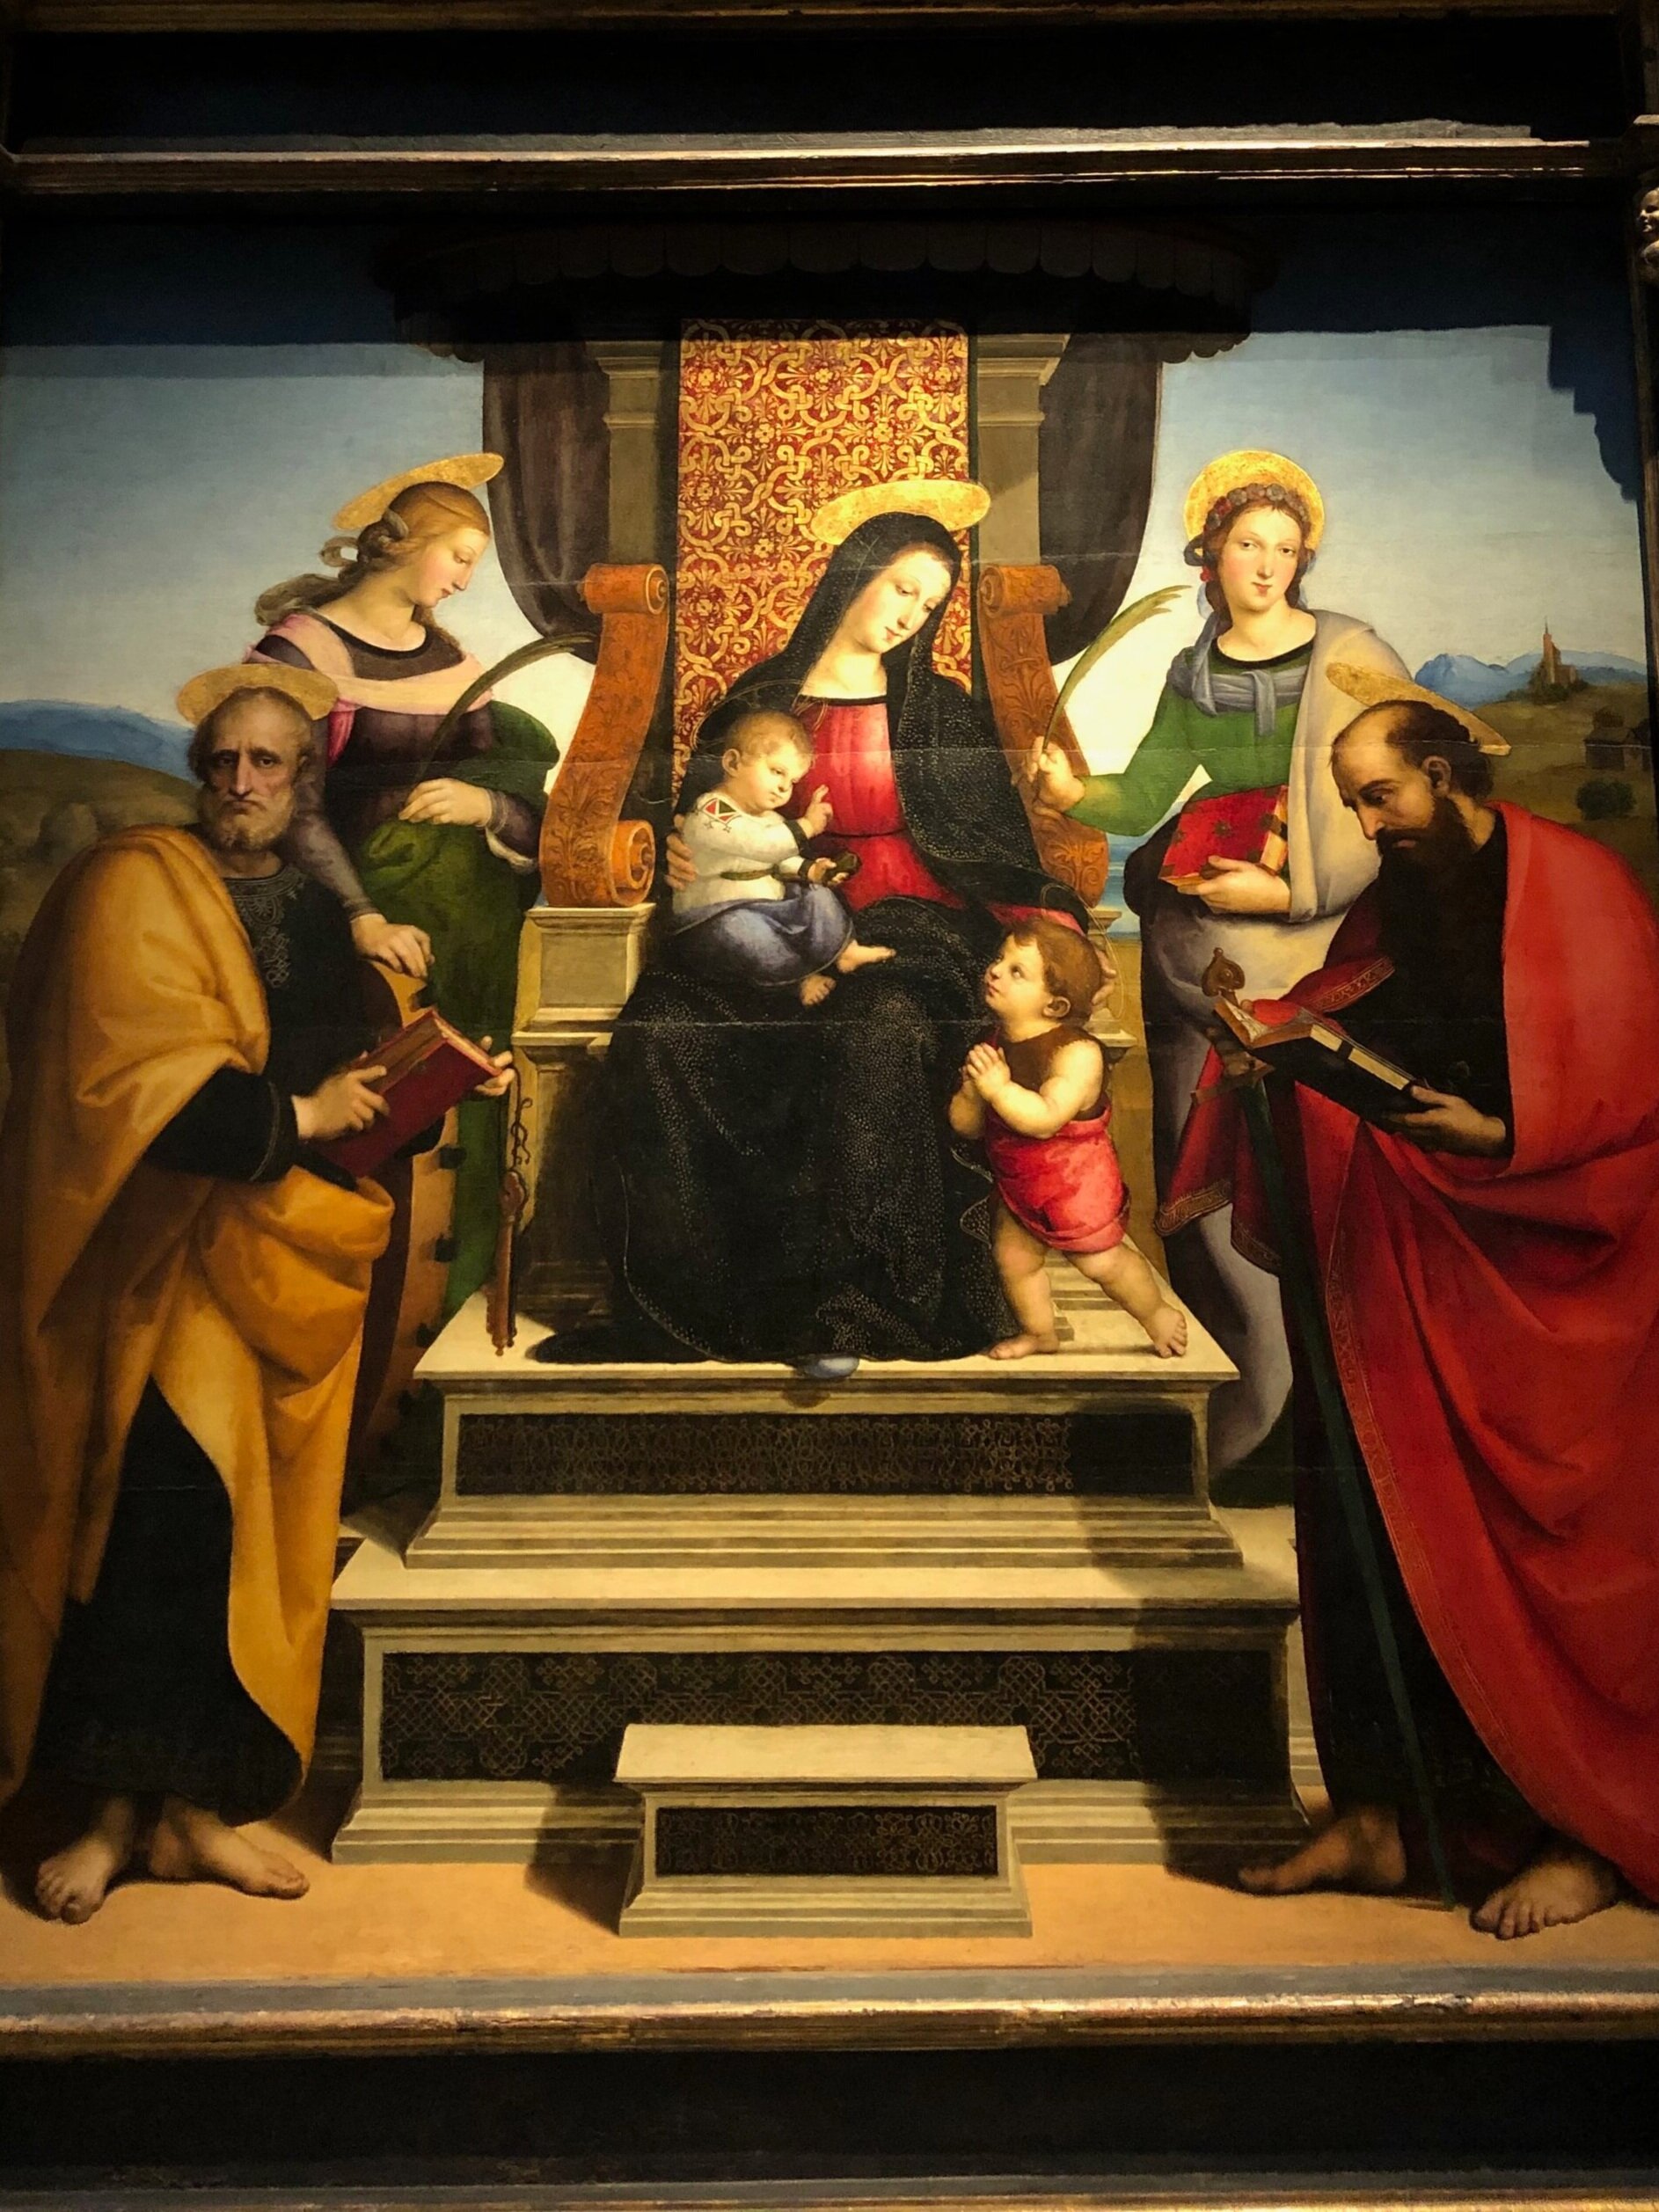 Raphael, "Mary and Child Enthroned with Saints"